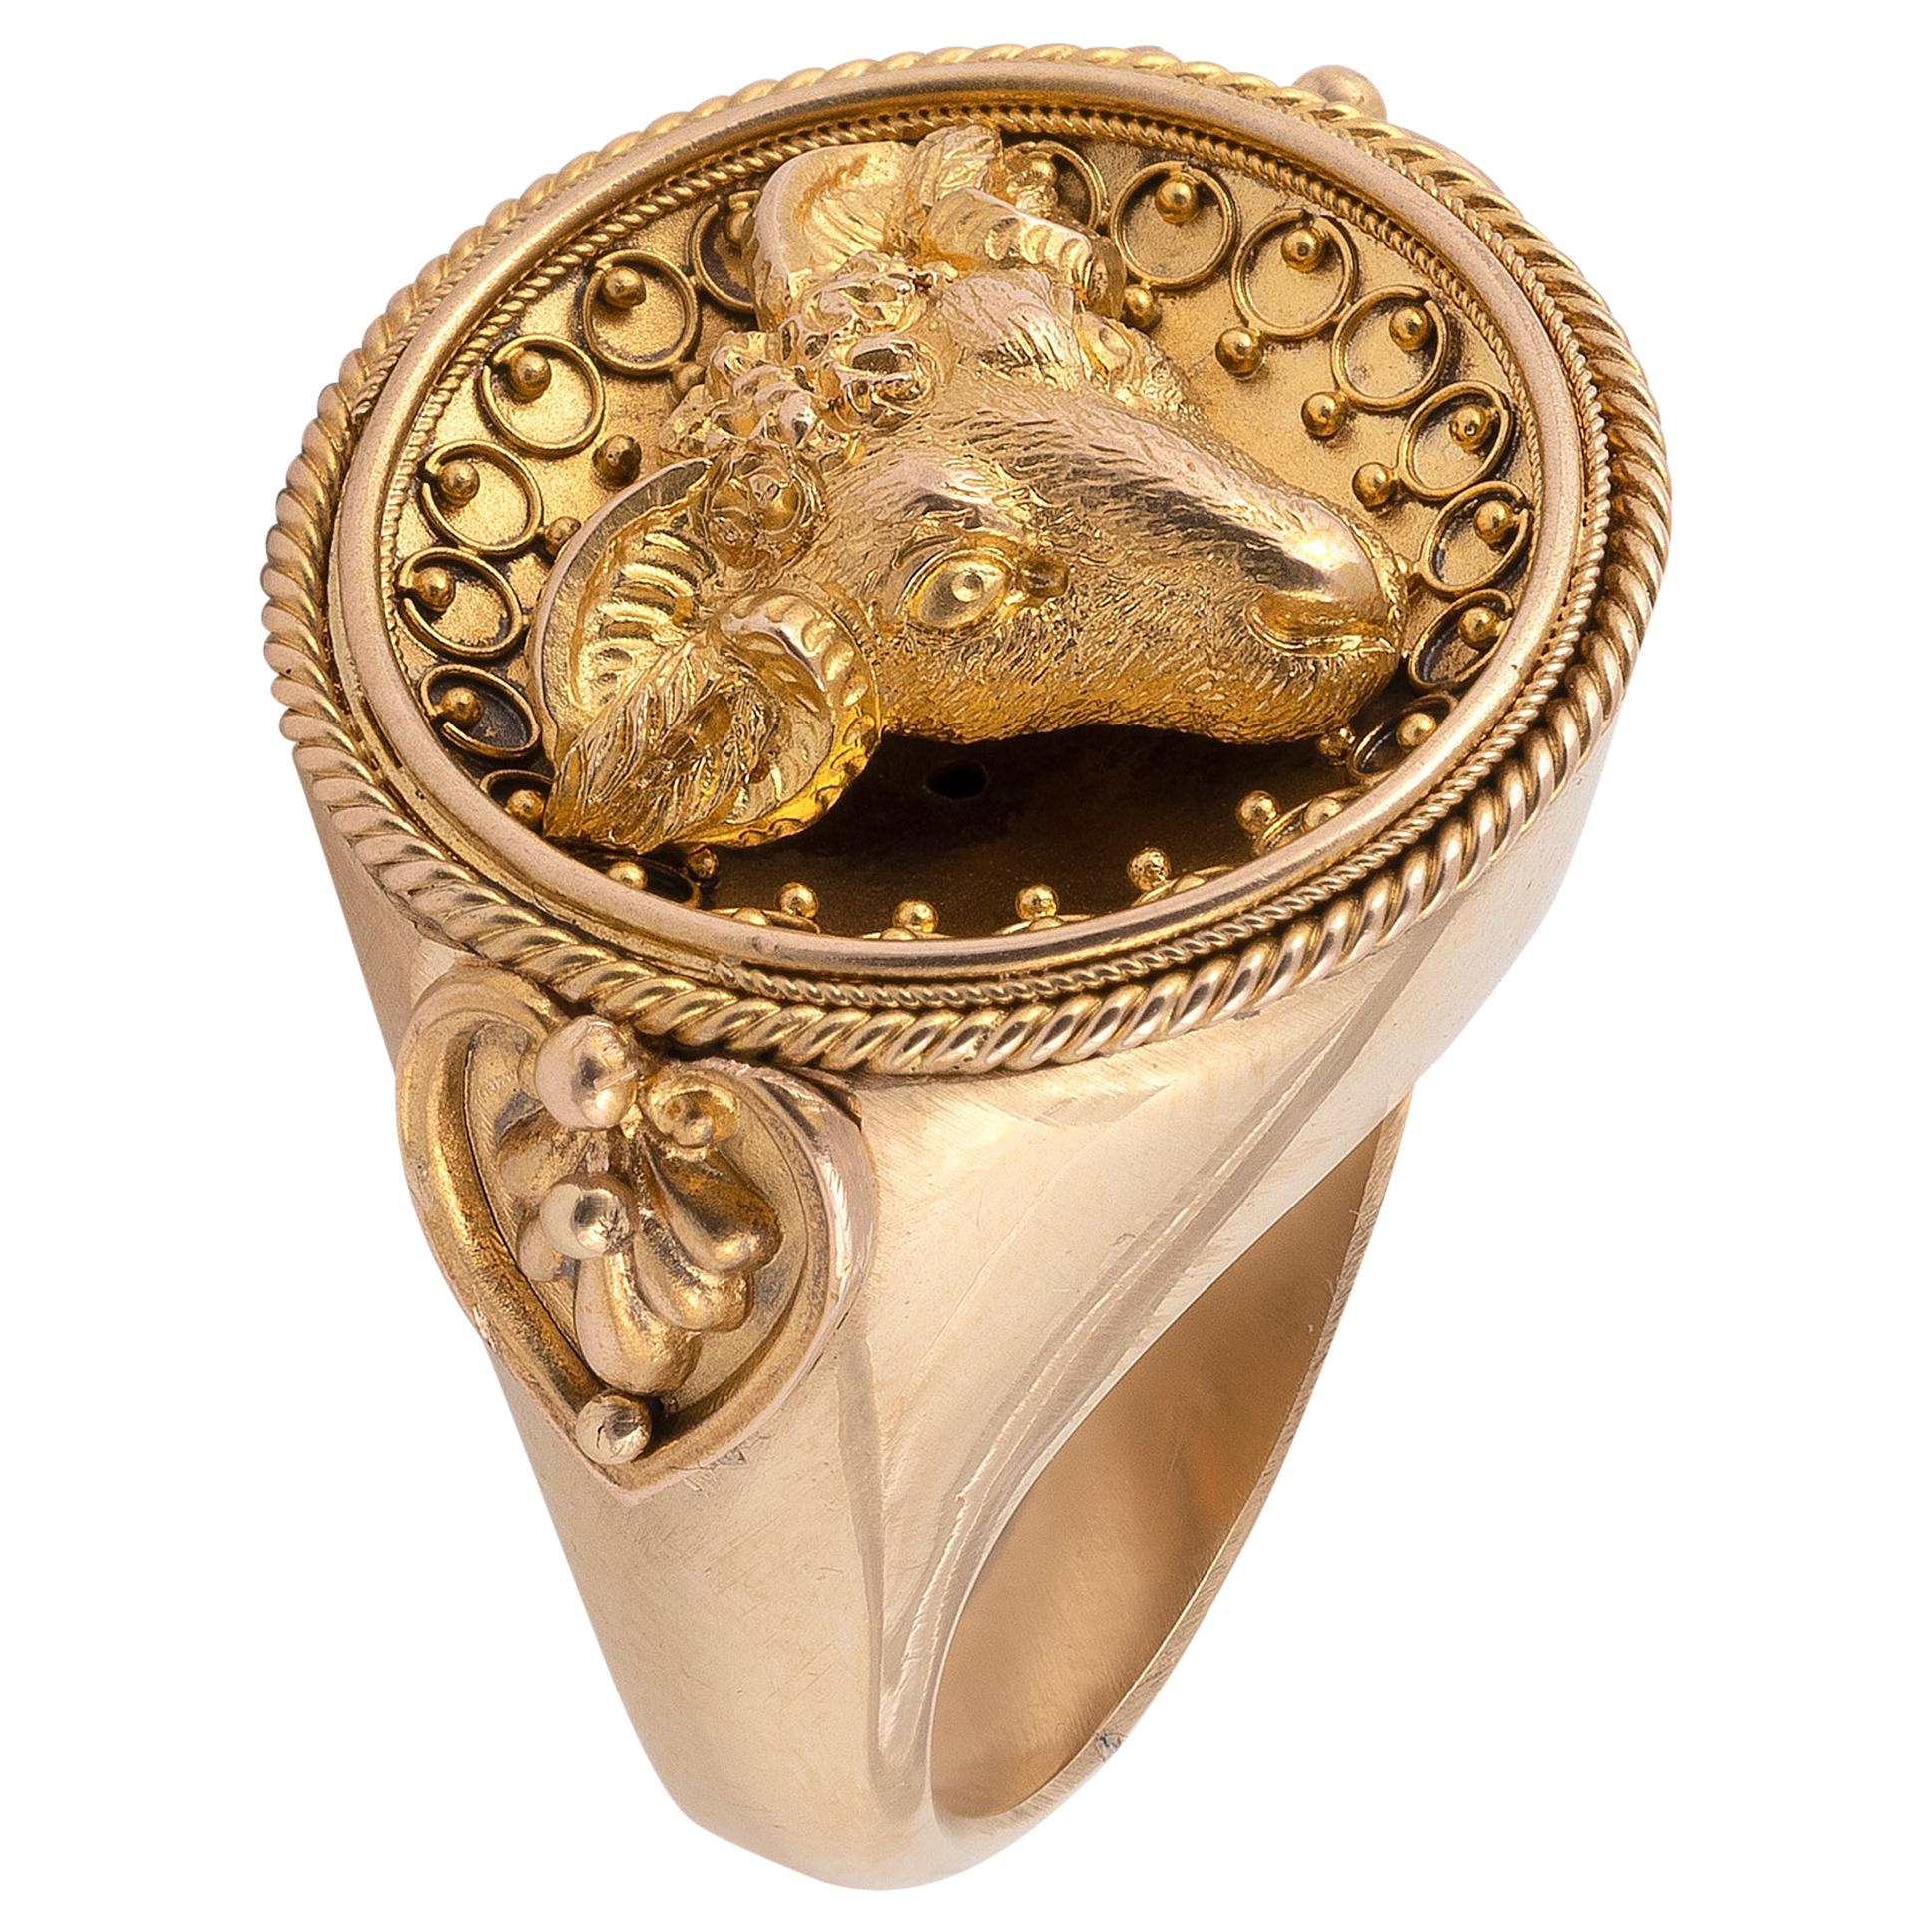 19th Century Archaeological Revival Gold Ring by Streeter & Co.